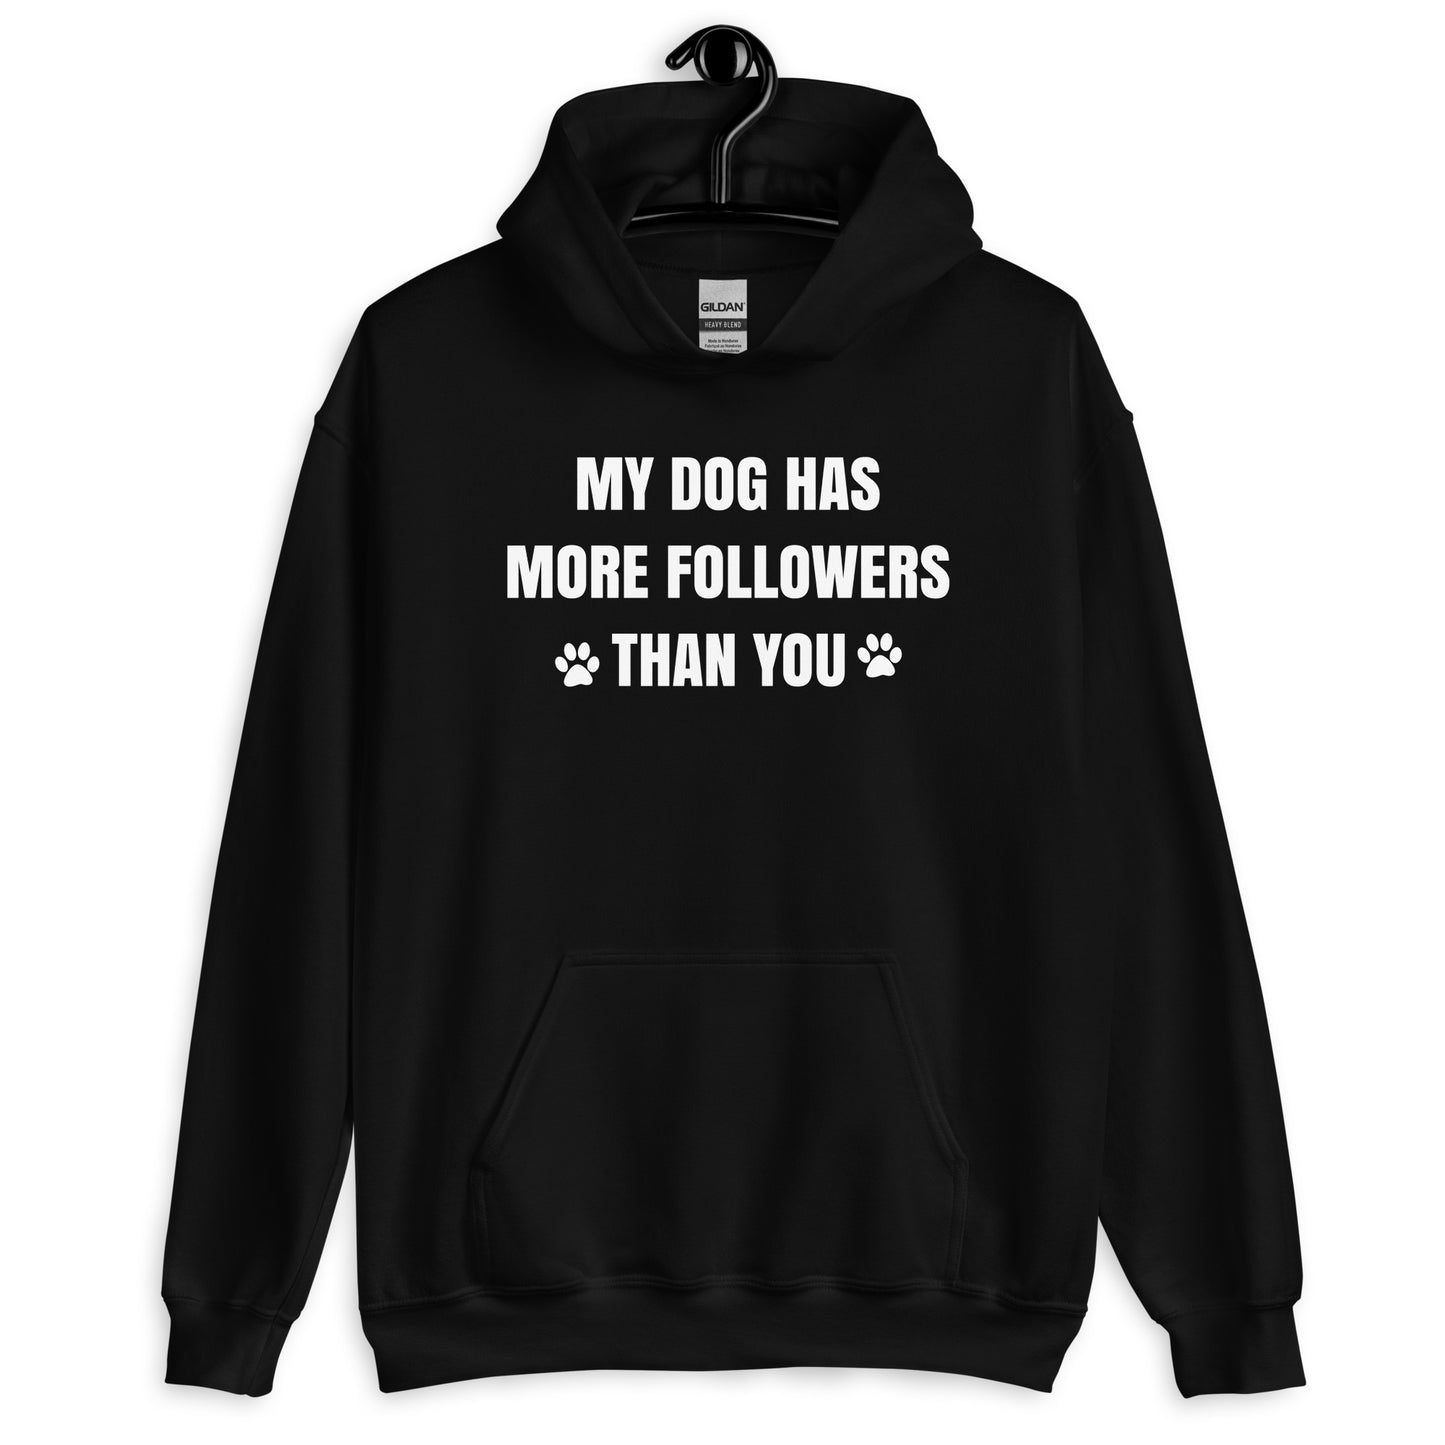 My Dog Has More Followers Than You Unisex Hoodie